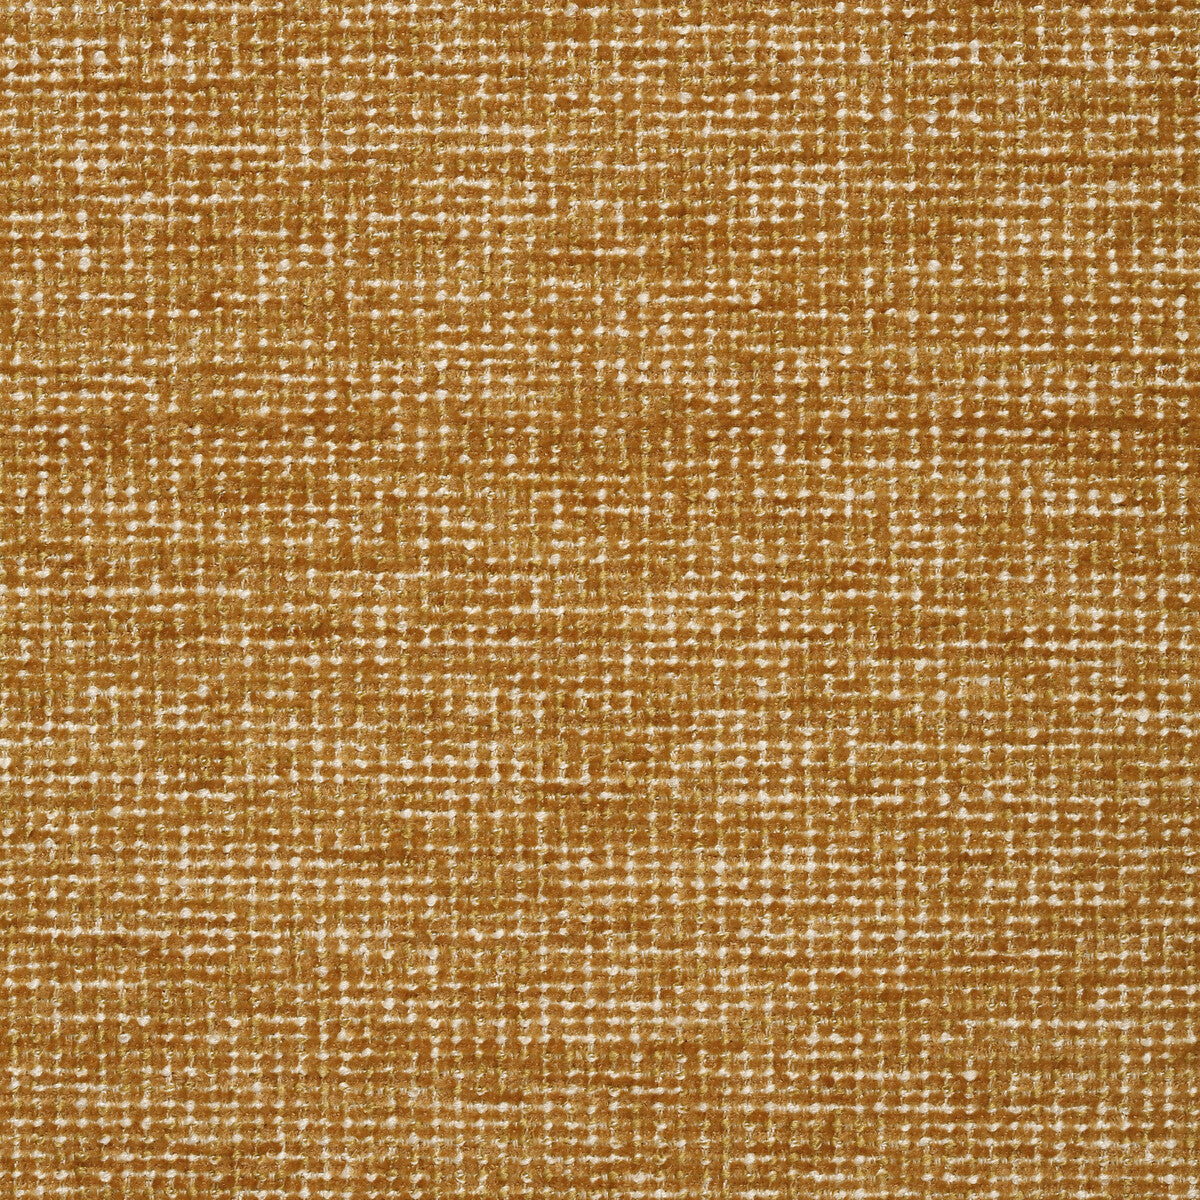 Kravet Contract fabric in 35116-12 color - pattern 35116.12.0 - by Kravet Contract in the Crypton Incase collection